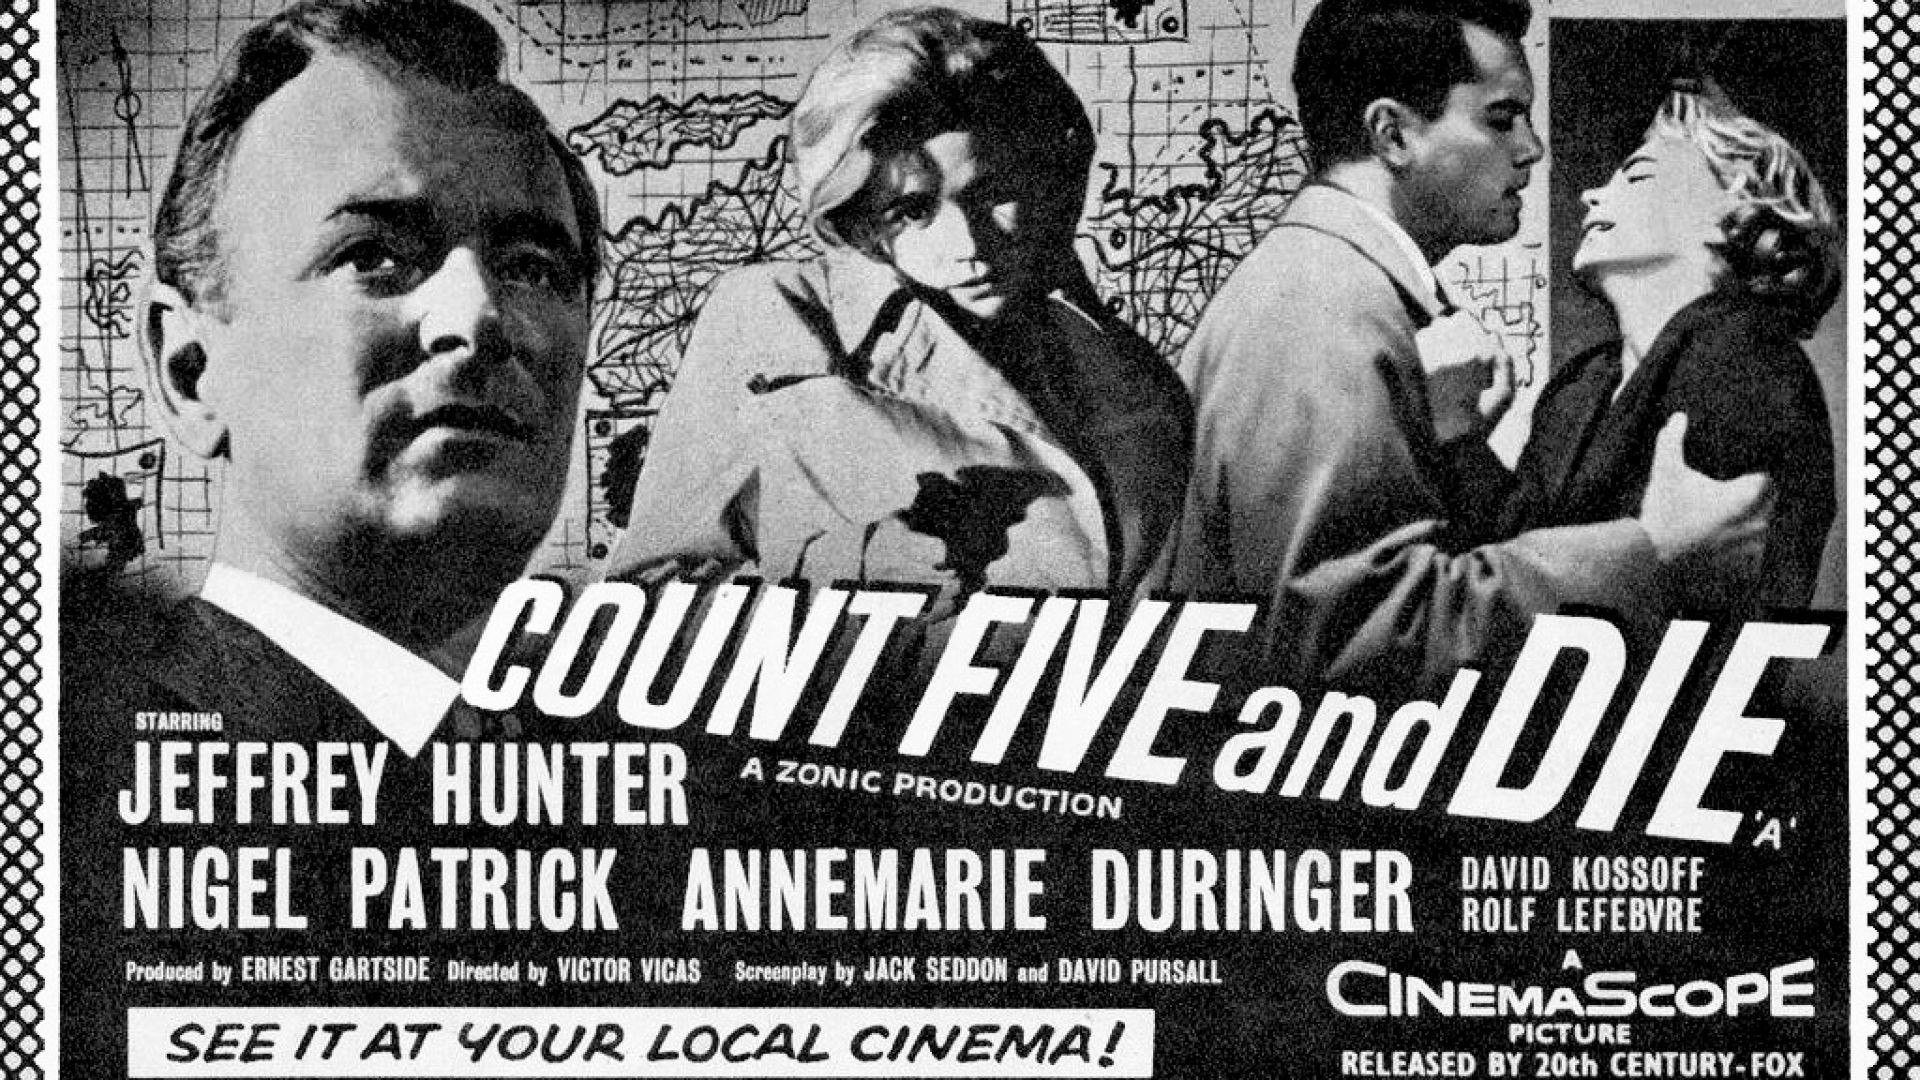 ⁣Count Five and Die (1957)